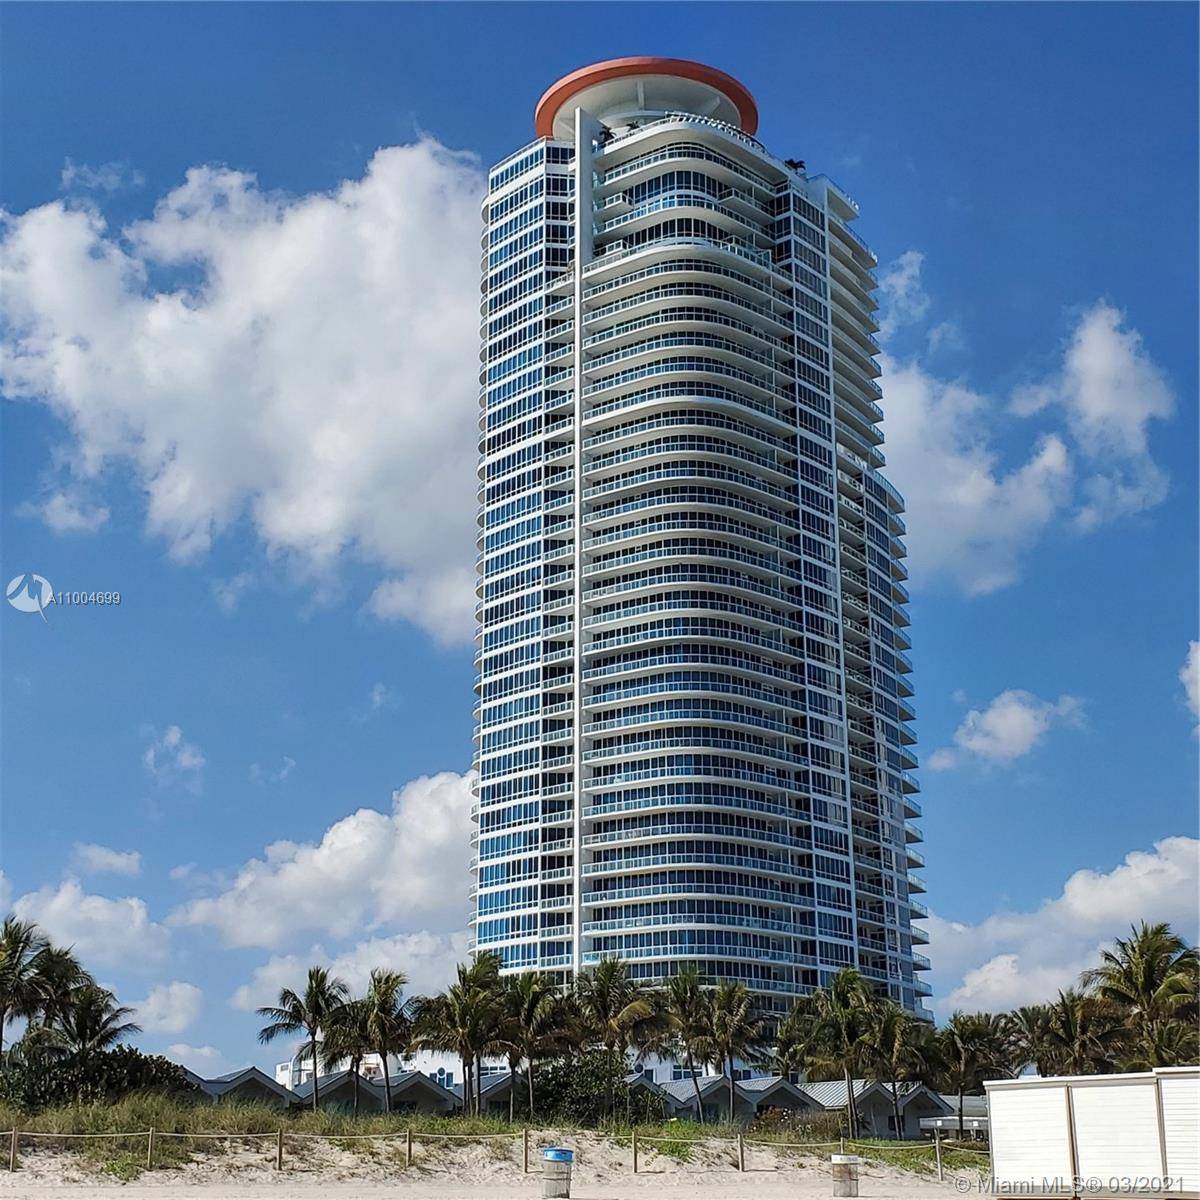 Neverending views of the Atlantic coastline, South Beach, Fisher Island, Government cut From this potential spectacular combination of units 3504 and 3505 at The Continuum South Tower.